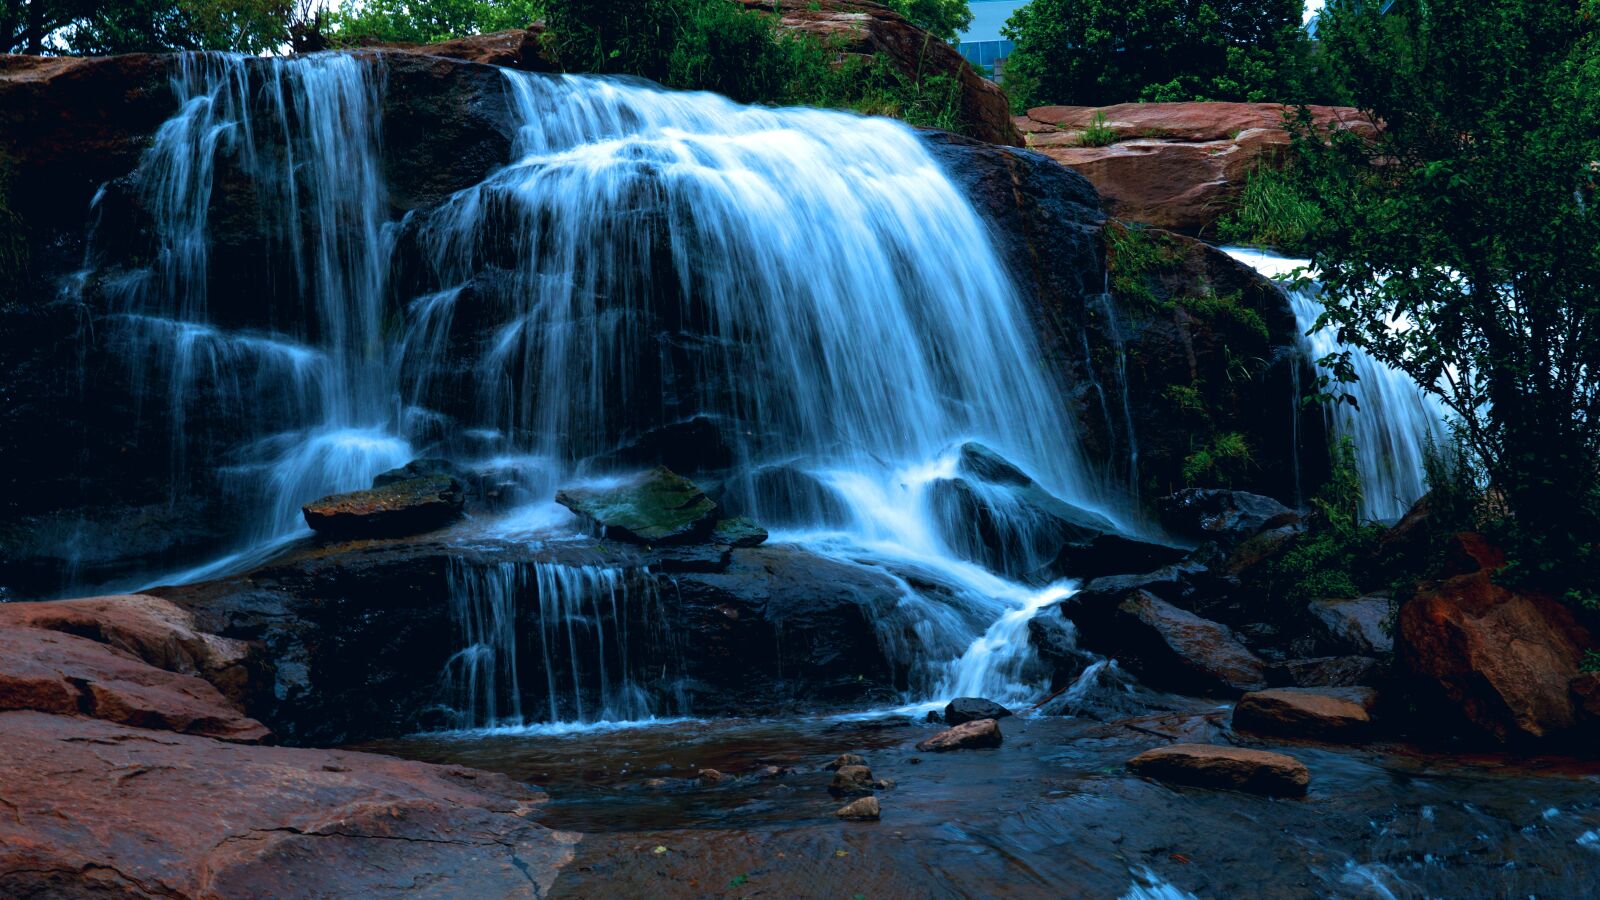 Sony a6500 sample photo. Greenville, waterfall, nature photography